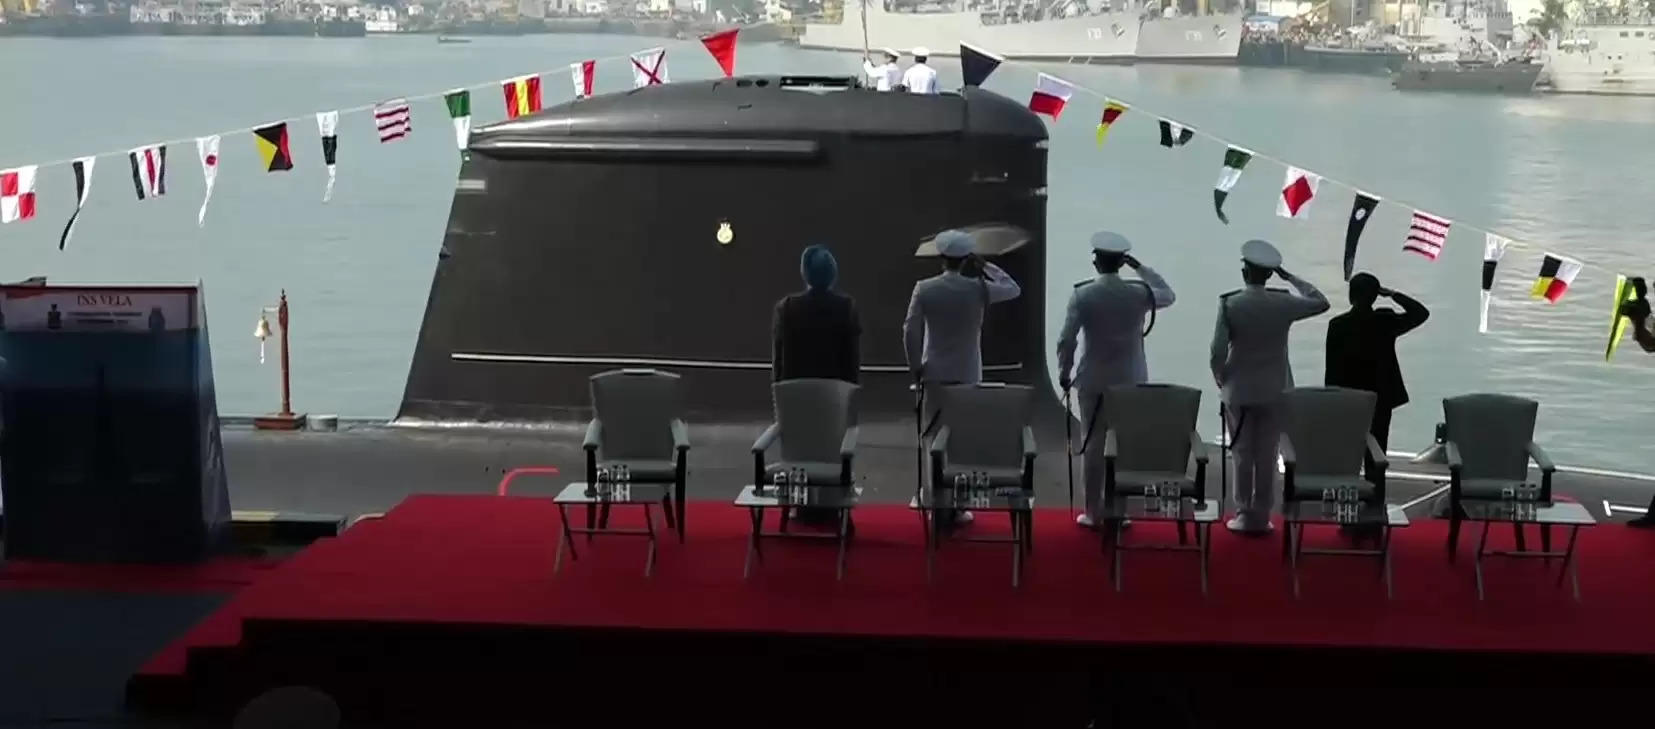 INS Vela Commissioned know more about this submarine of the Indian Navy